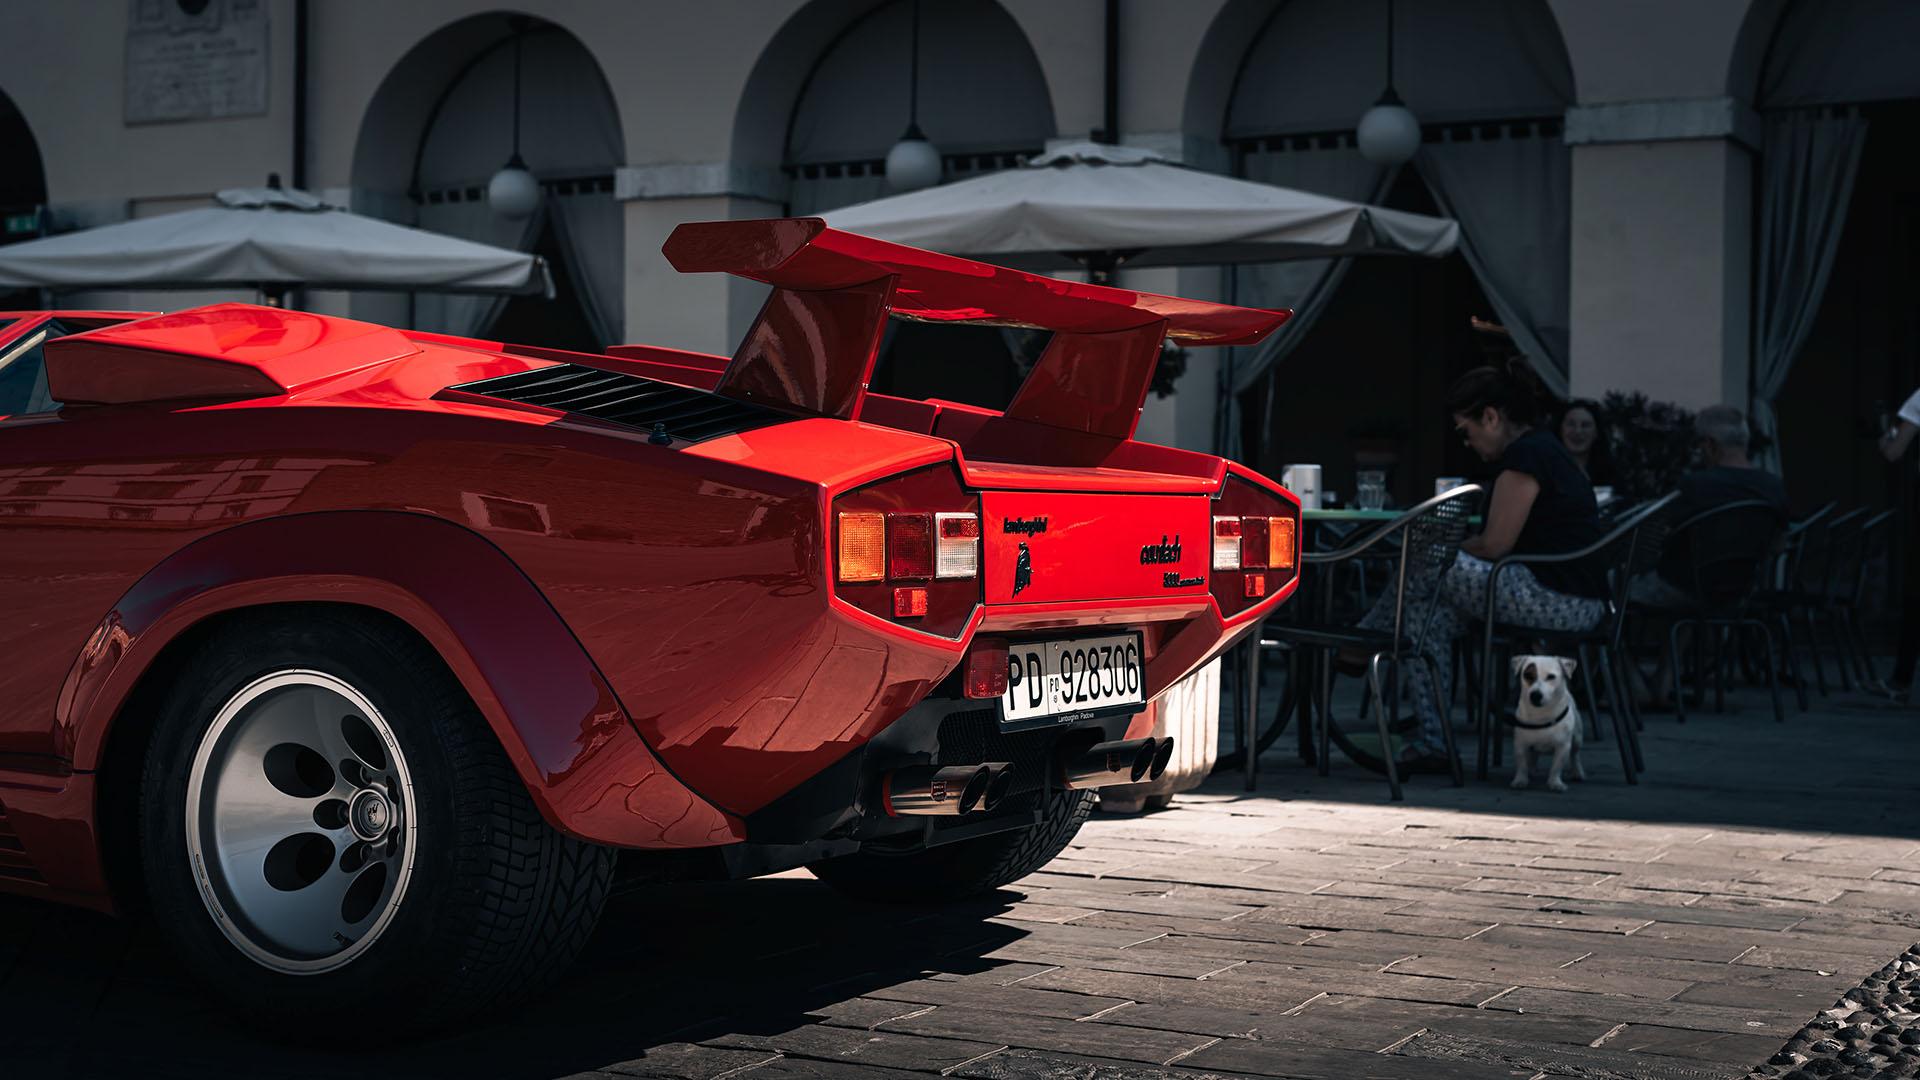 Countach and lm002 v12 15